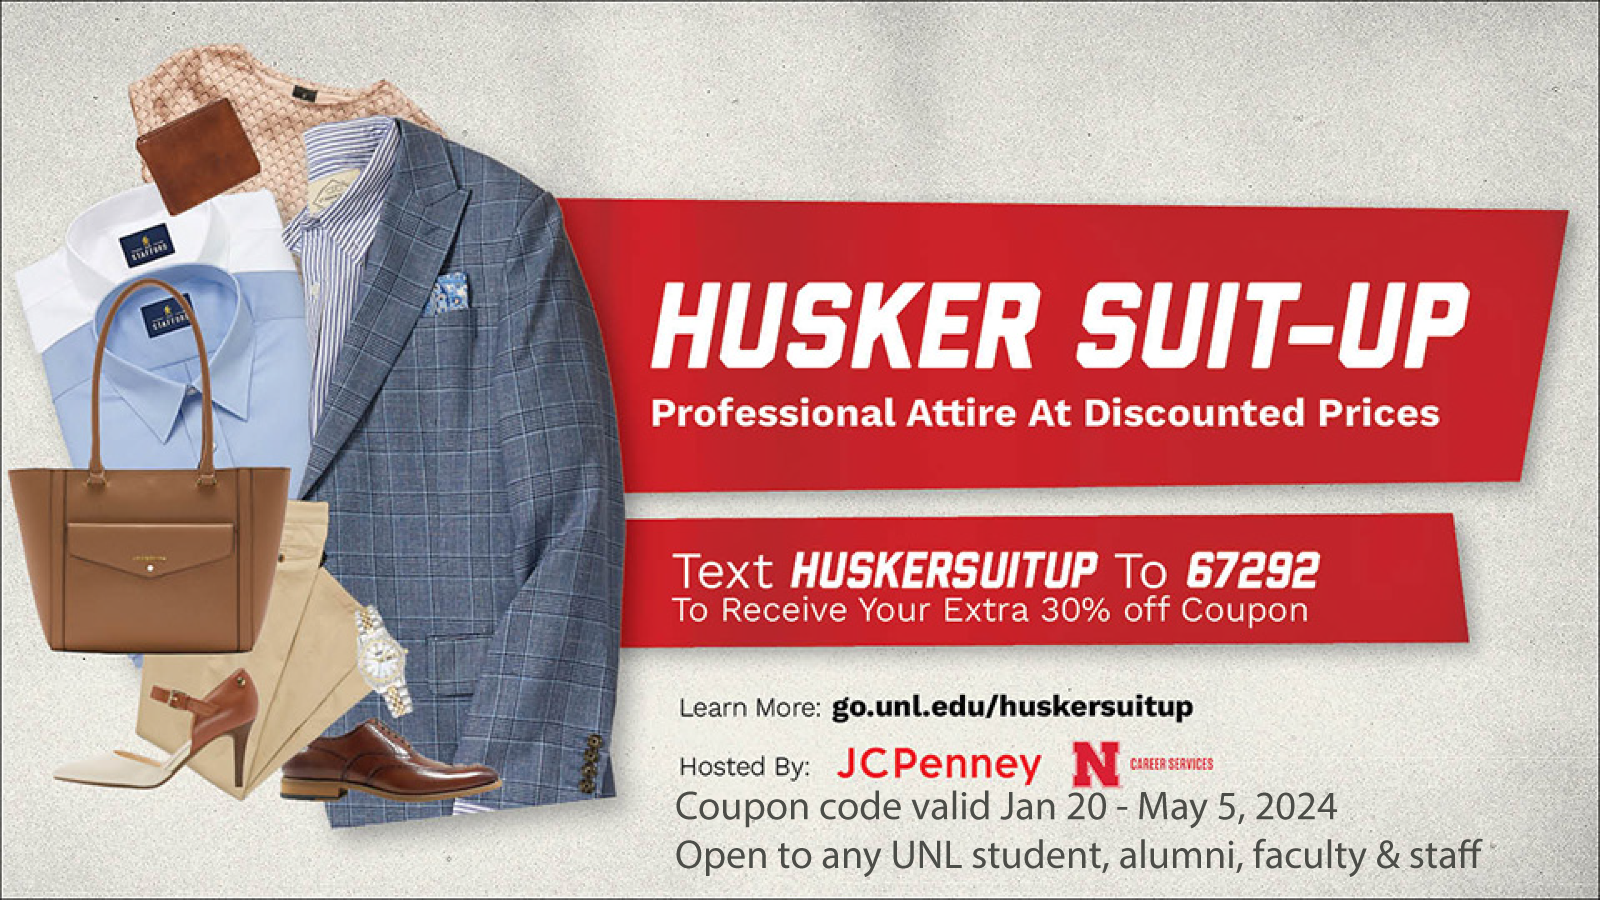 Husker Suit-Up Coupon Code Valid till May 5, 2024